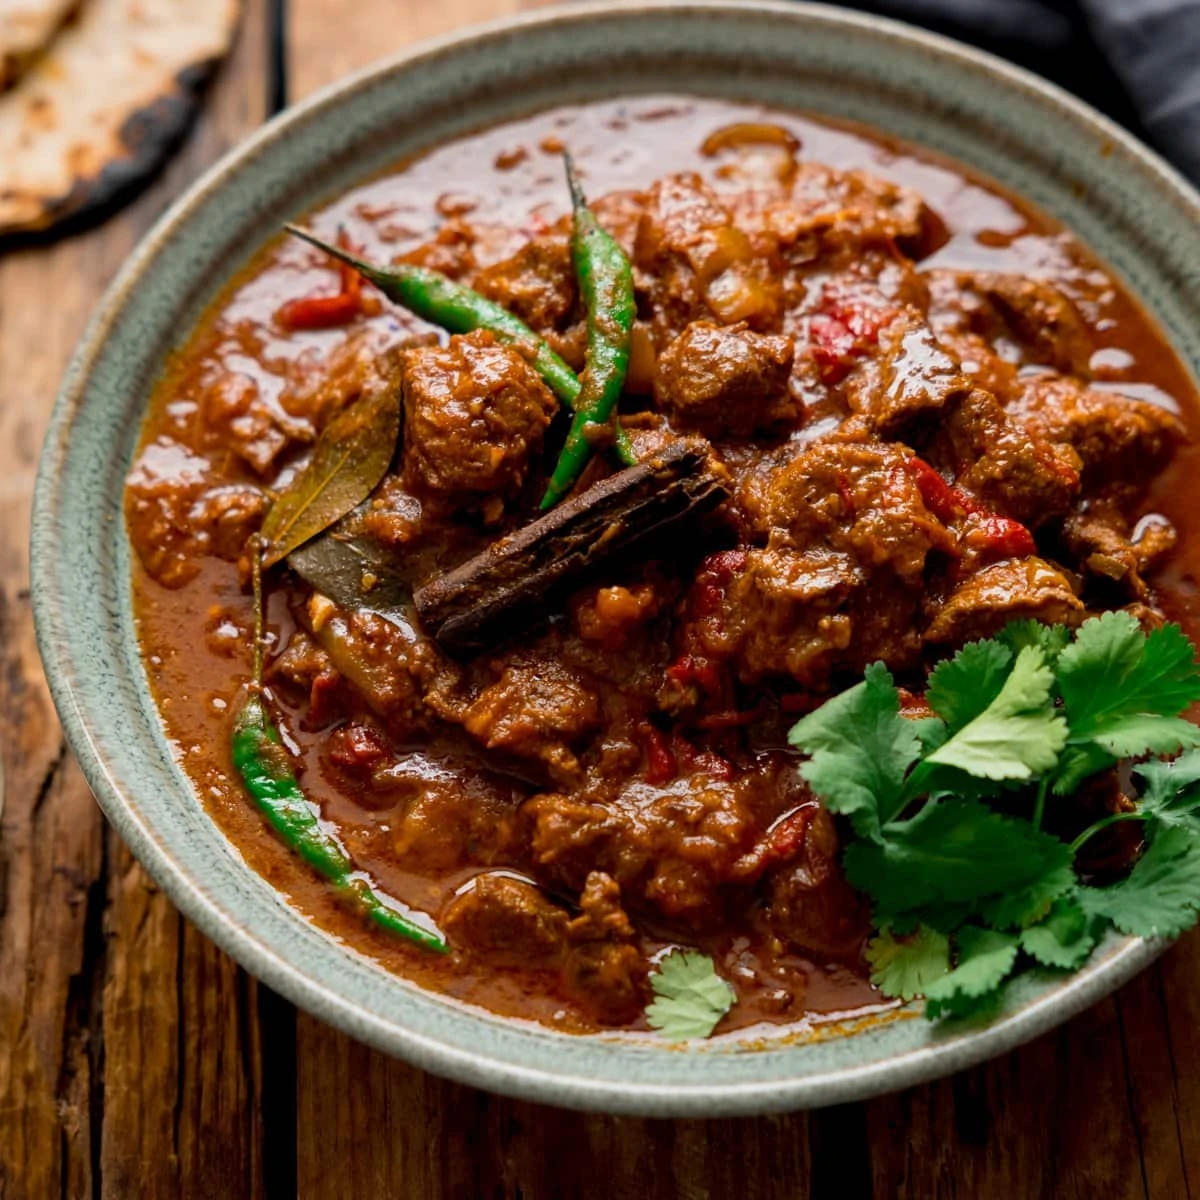 Lamb Bhuna curry in a green bowl on a wooden table